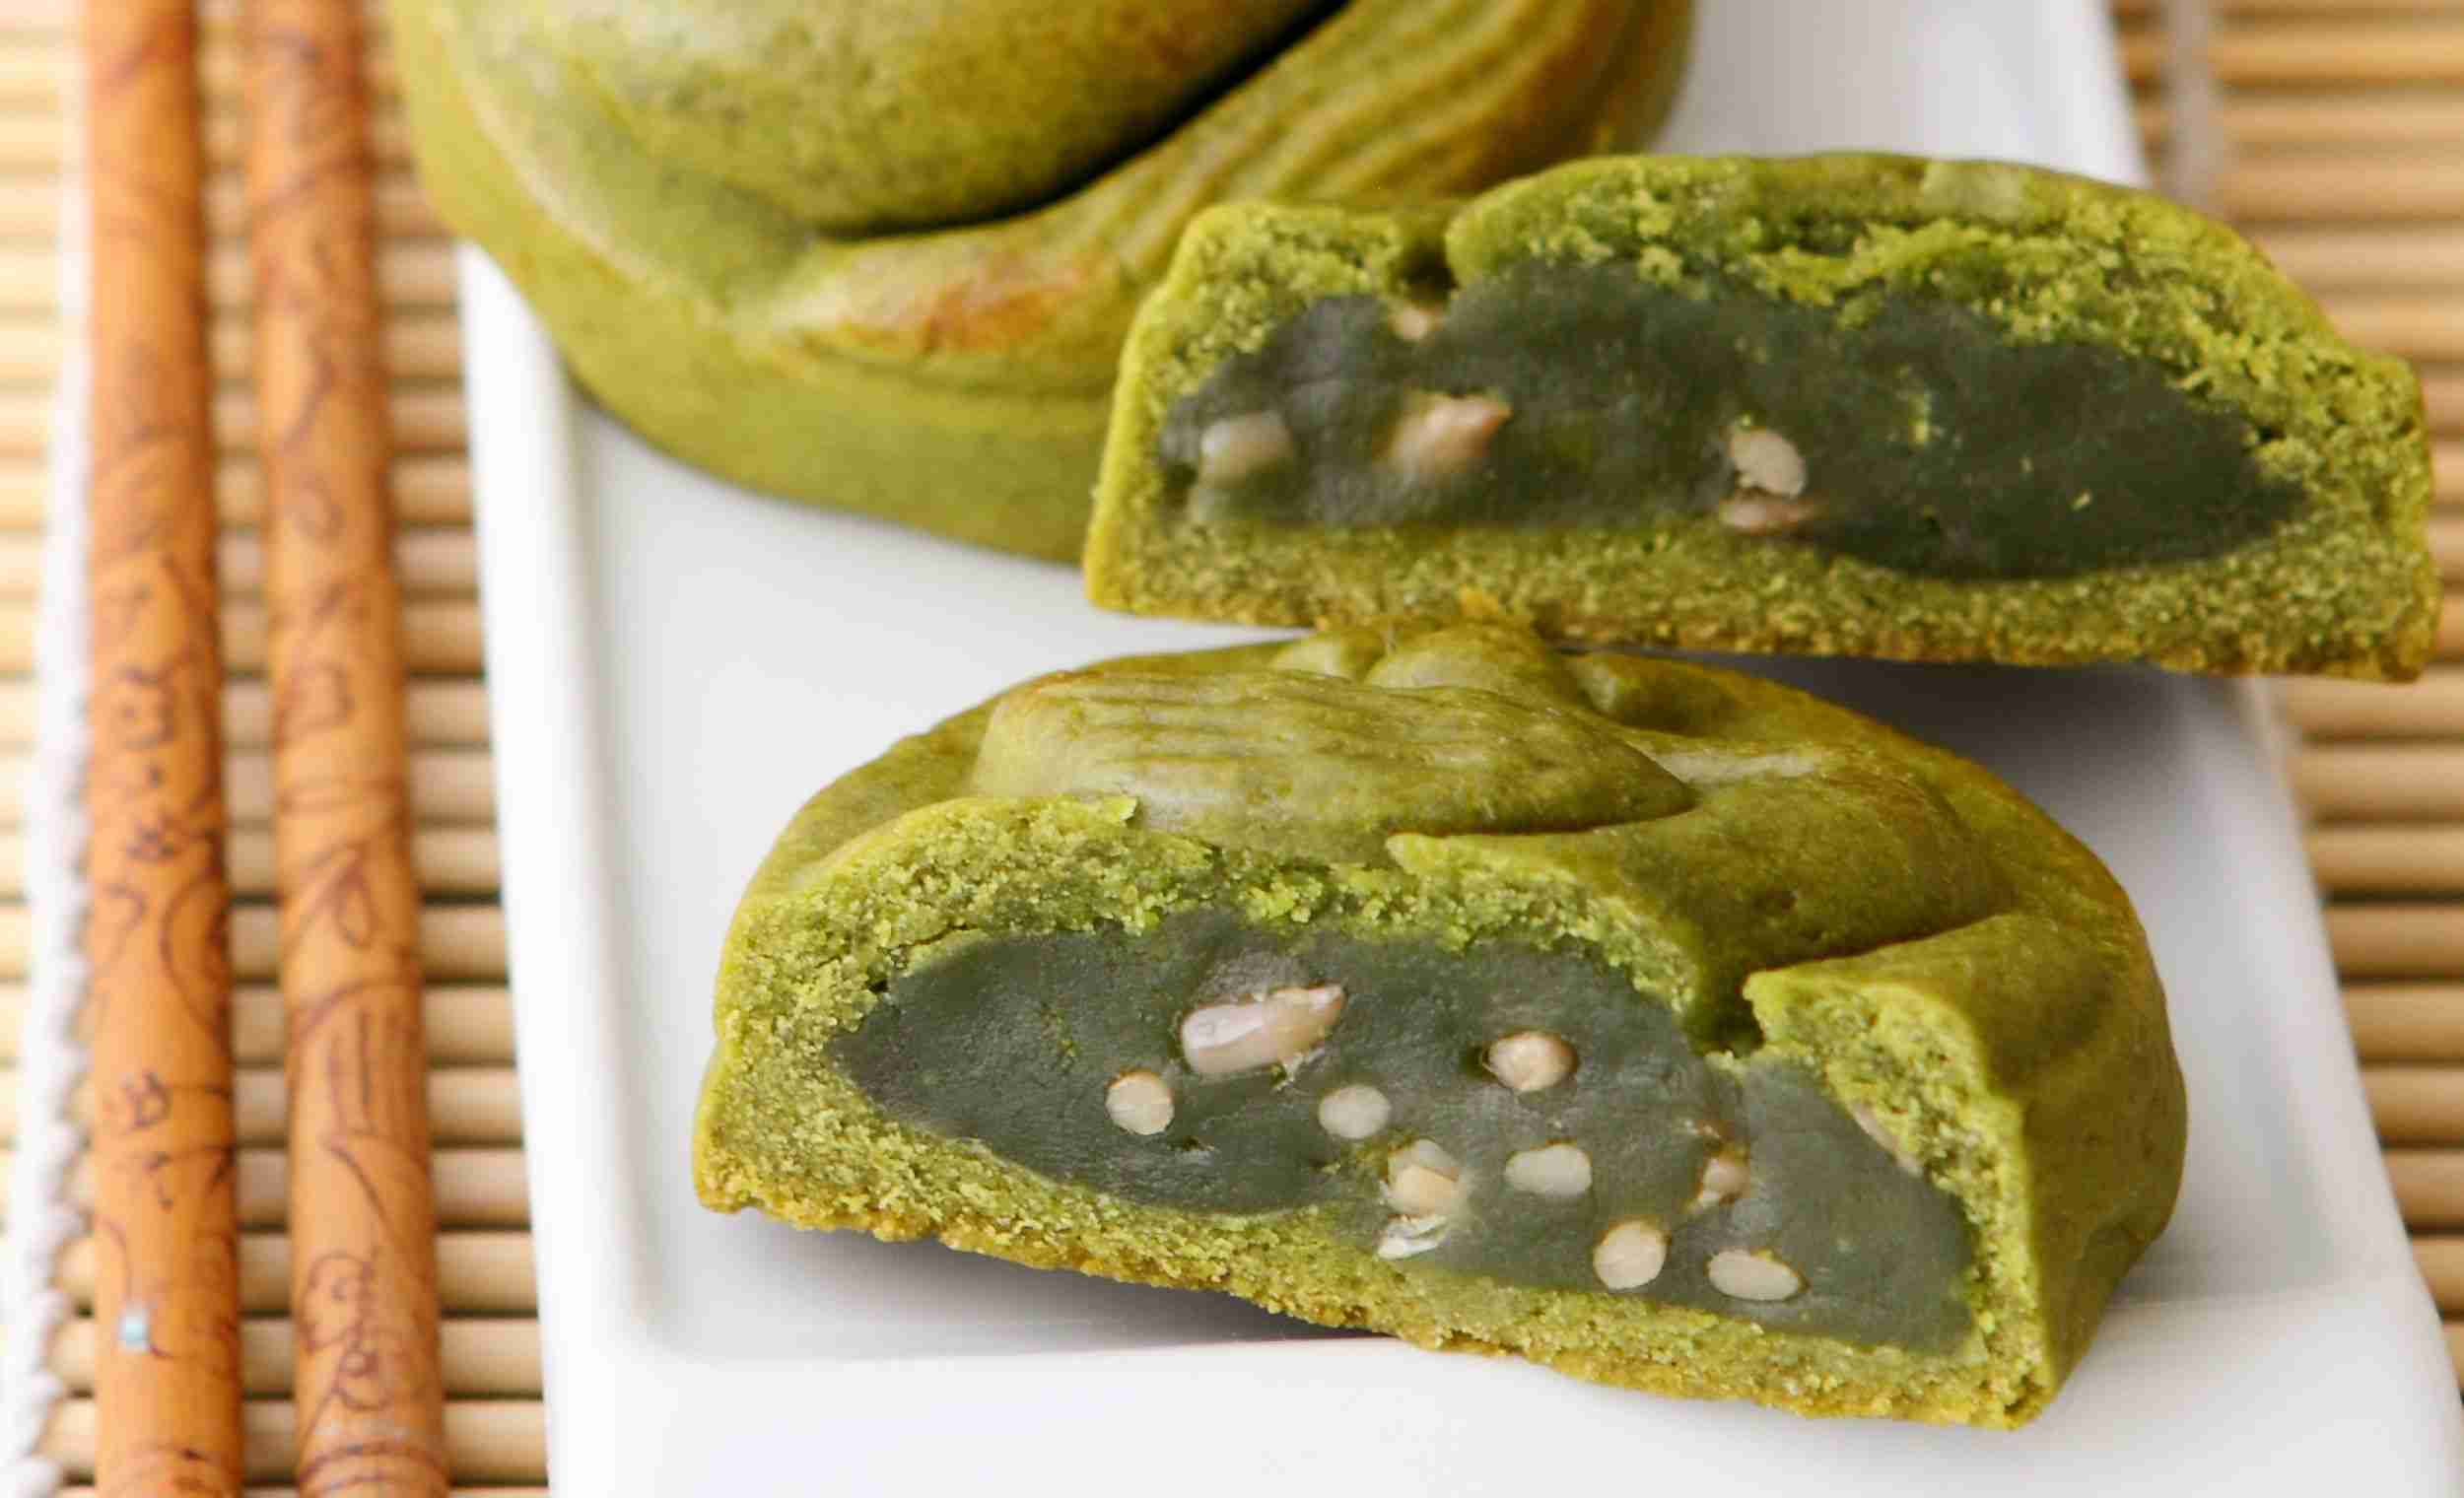 Green tea mooncakes are also popular but different from the traditionally made mooncakes